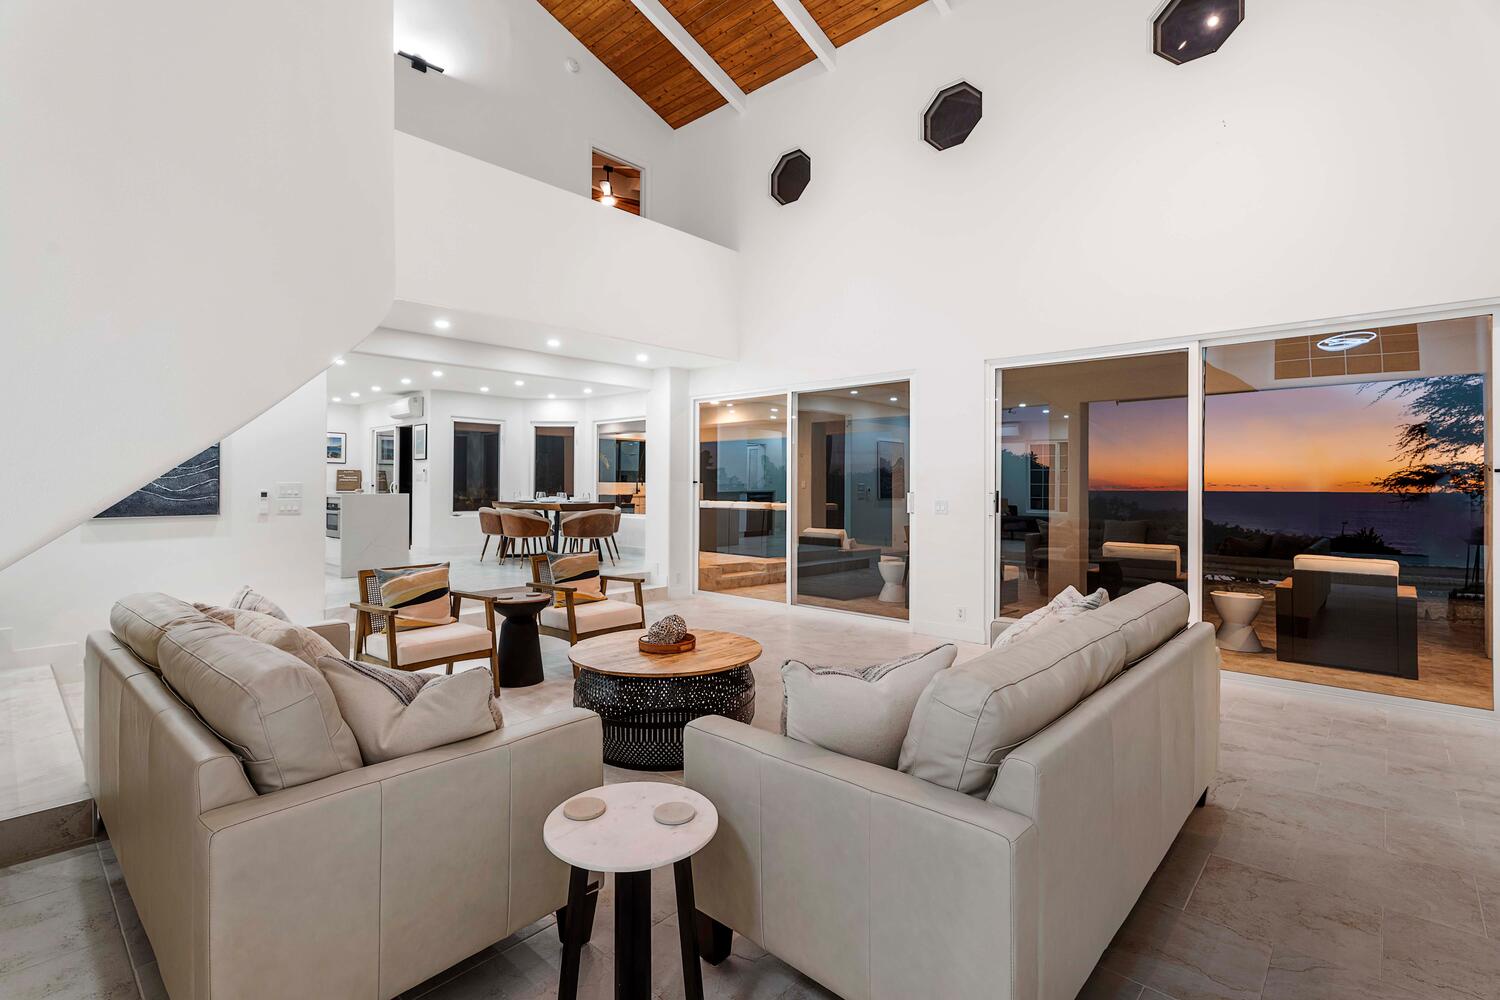 Kailua Kona Vacation Rentals, Ho'okipa Hale - Flounder in the spaciousness of the living area, highlighted by soaring vaulted ceilings and cozy sofas.